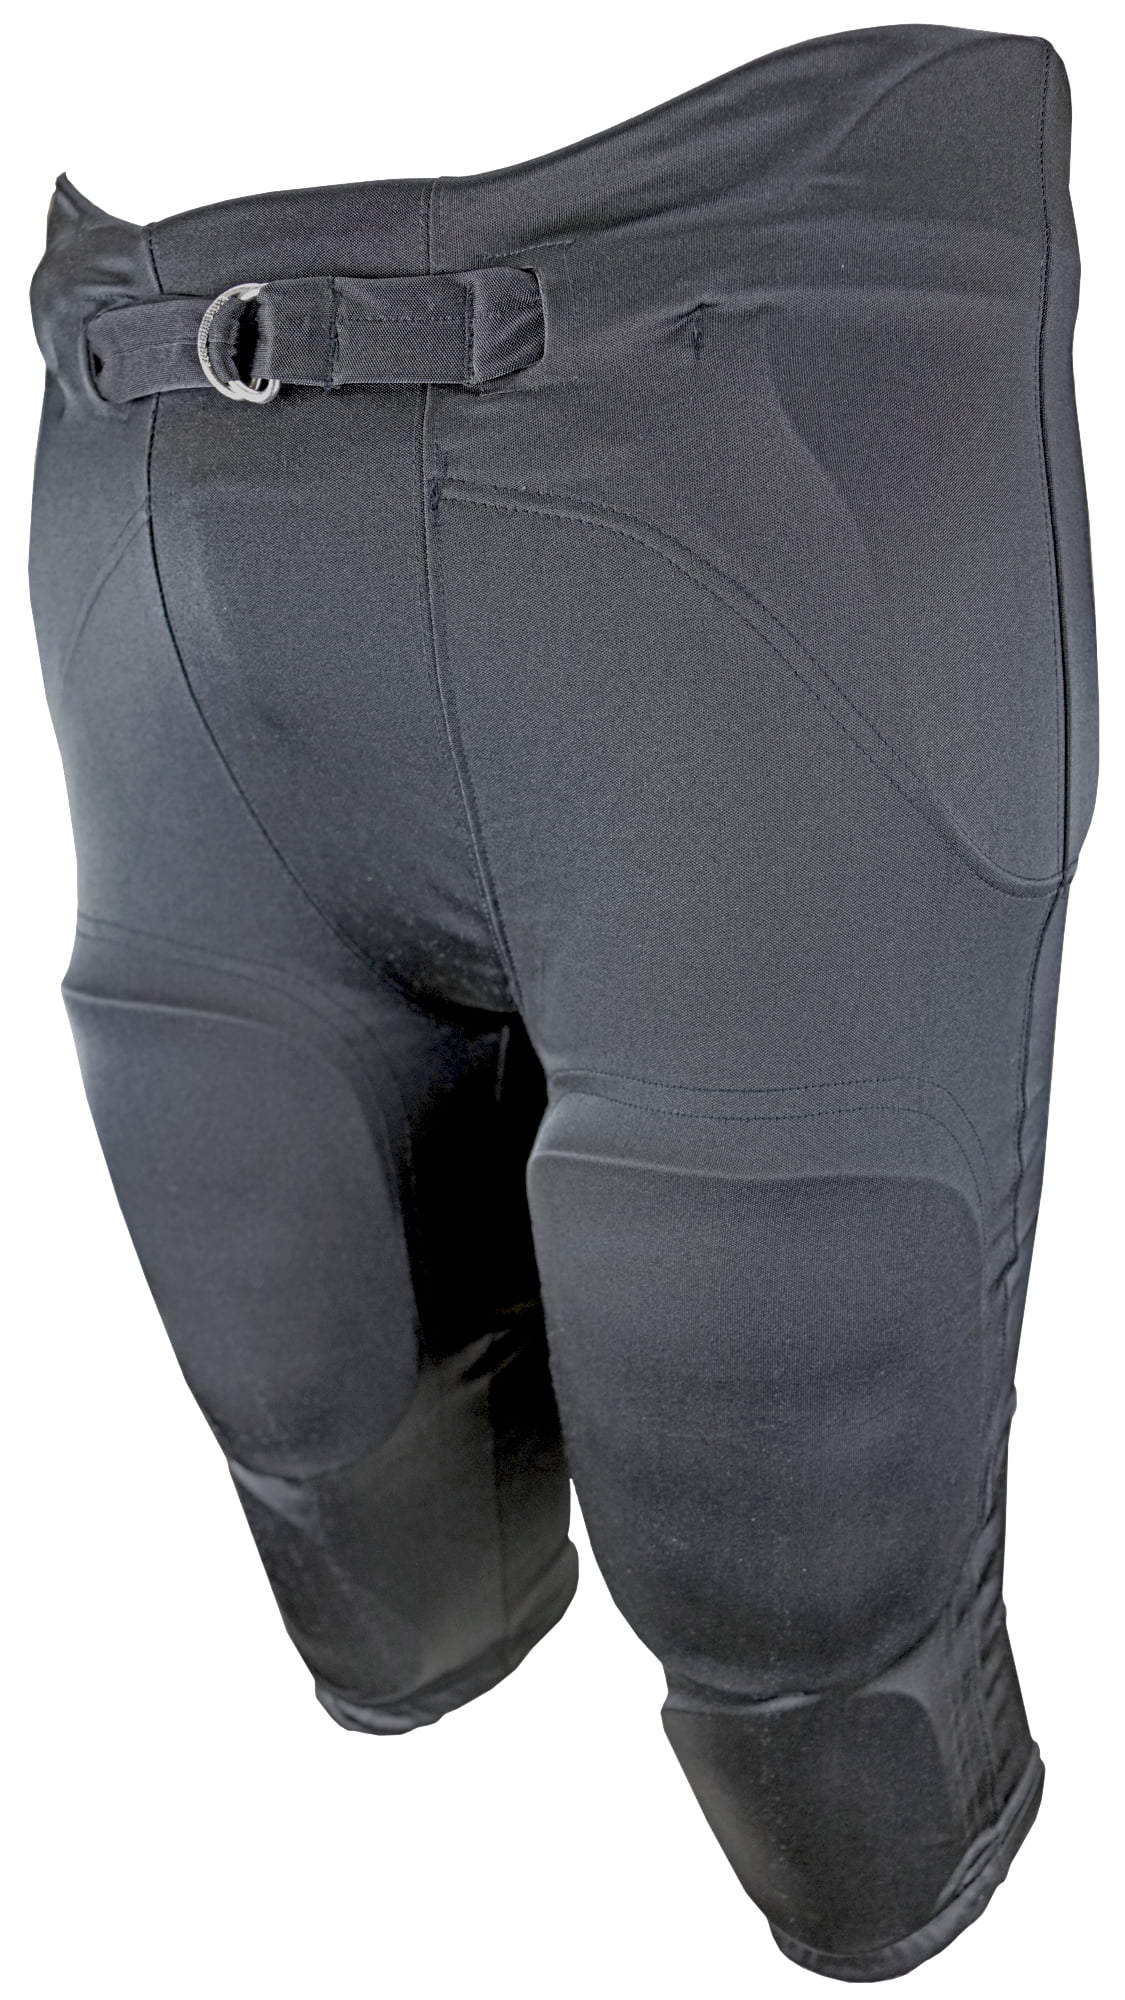 Epic Men's 7-Pad Integrated (Pads Sewn In) & Football Pants 